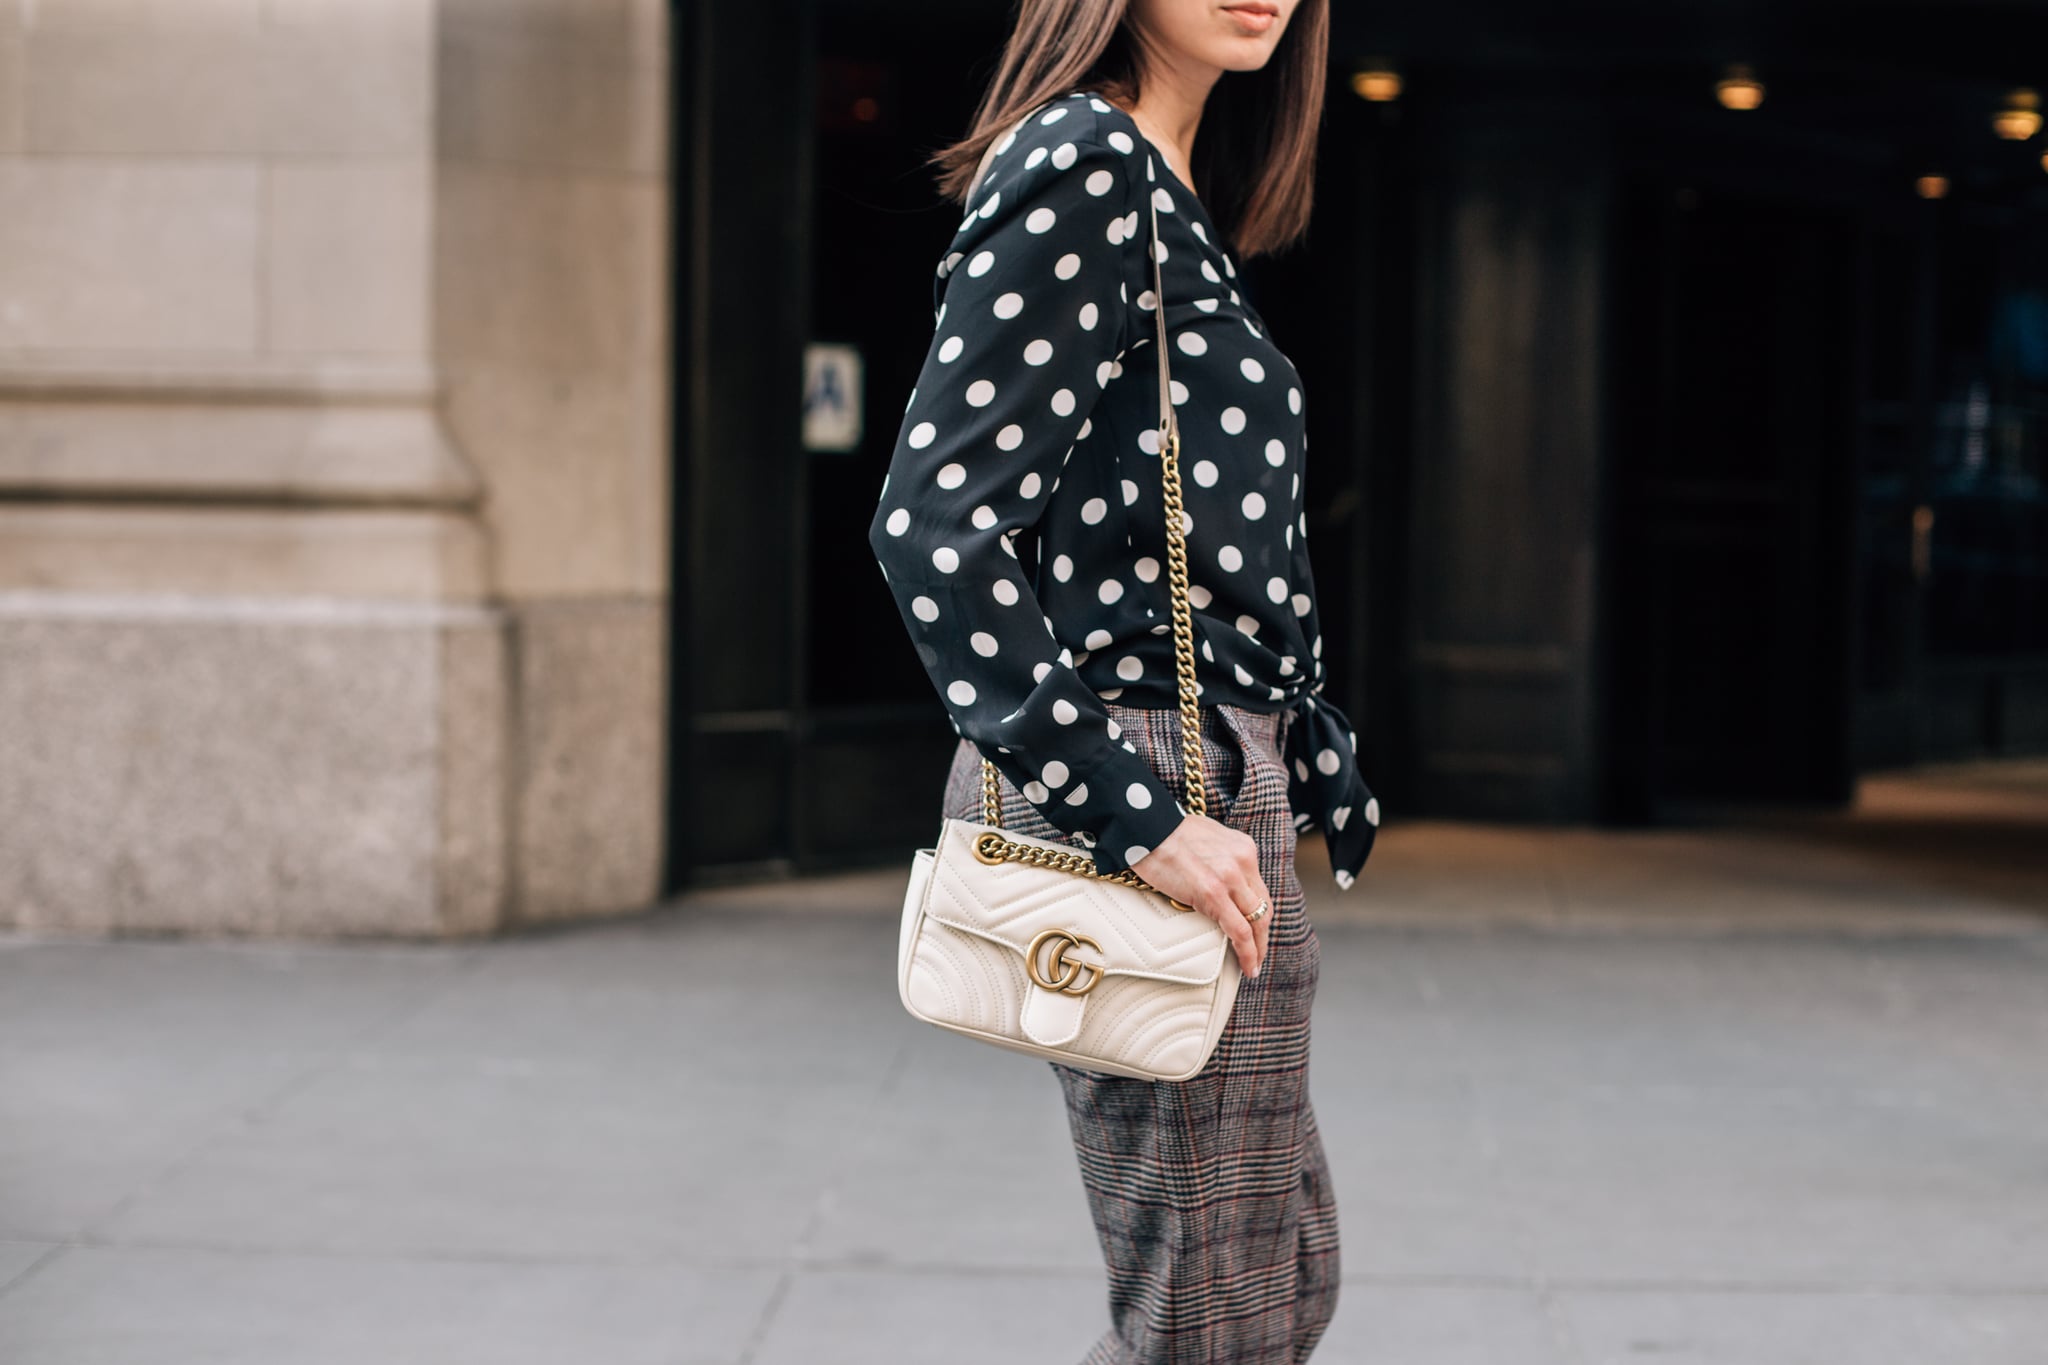 Polka Dot Fashion: How to Style Polka Dot Clothing & Accessories in 2019